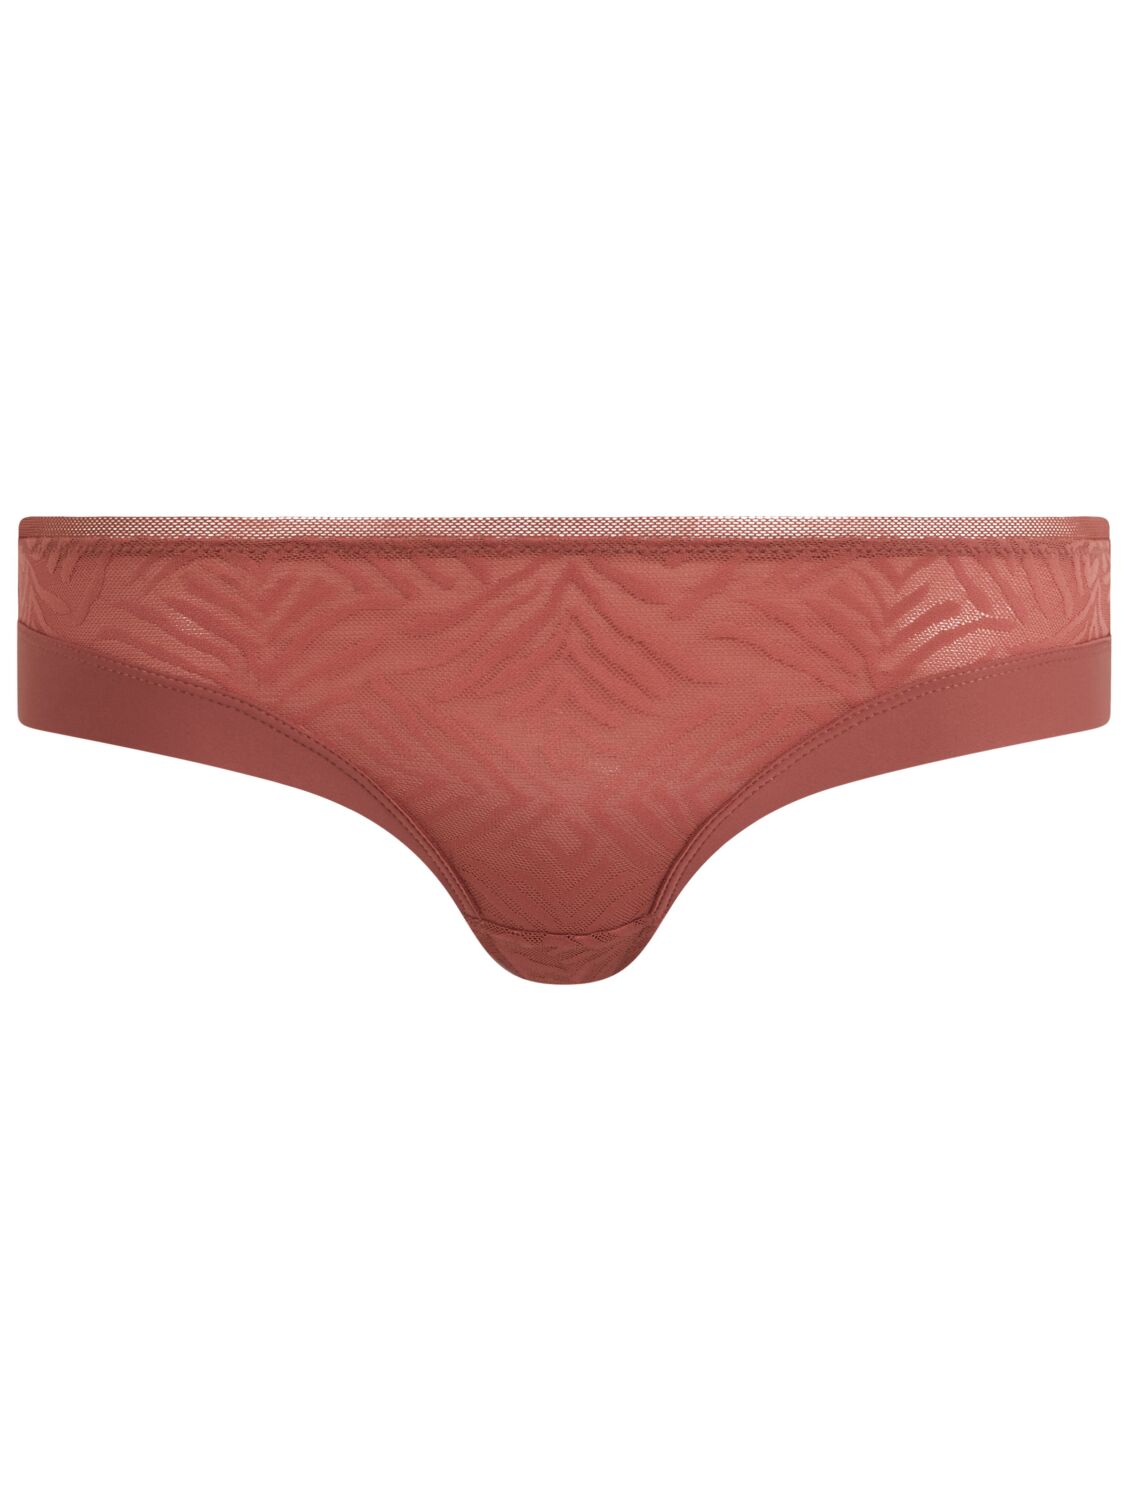 Chantelle Shorty Graphic Allure Amber